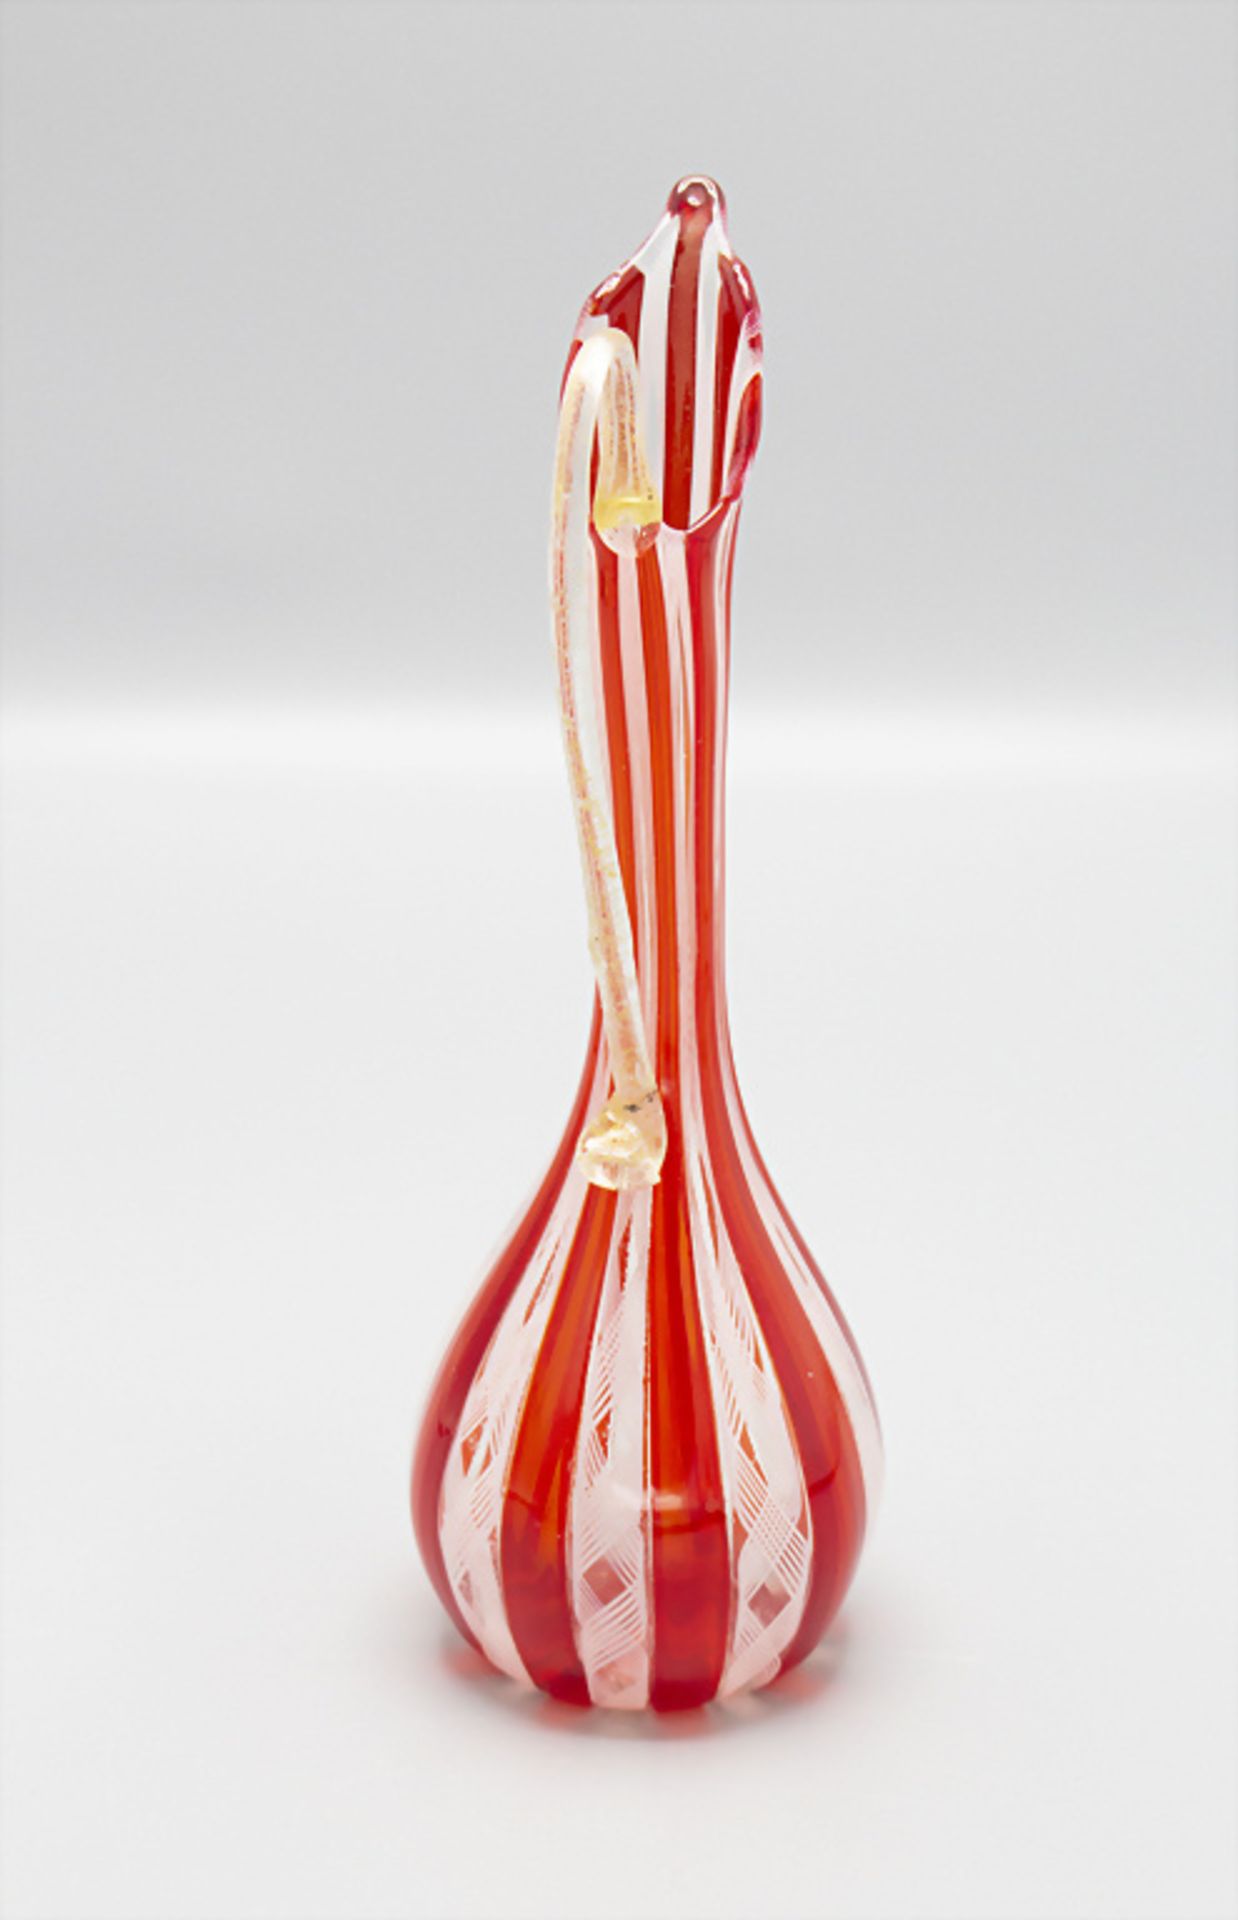 Henkelvase / A glass vase with handle, Murano, Aureljano & Toso, 1. Hälfte 20. Jh. - Image 3 of 5